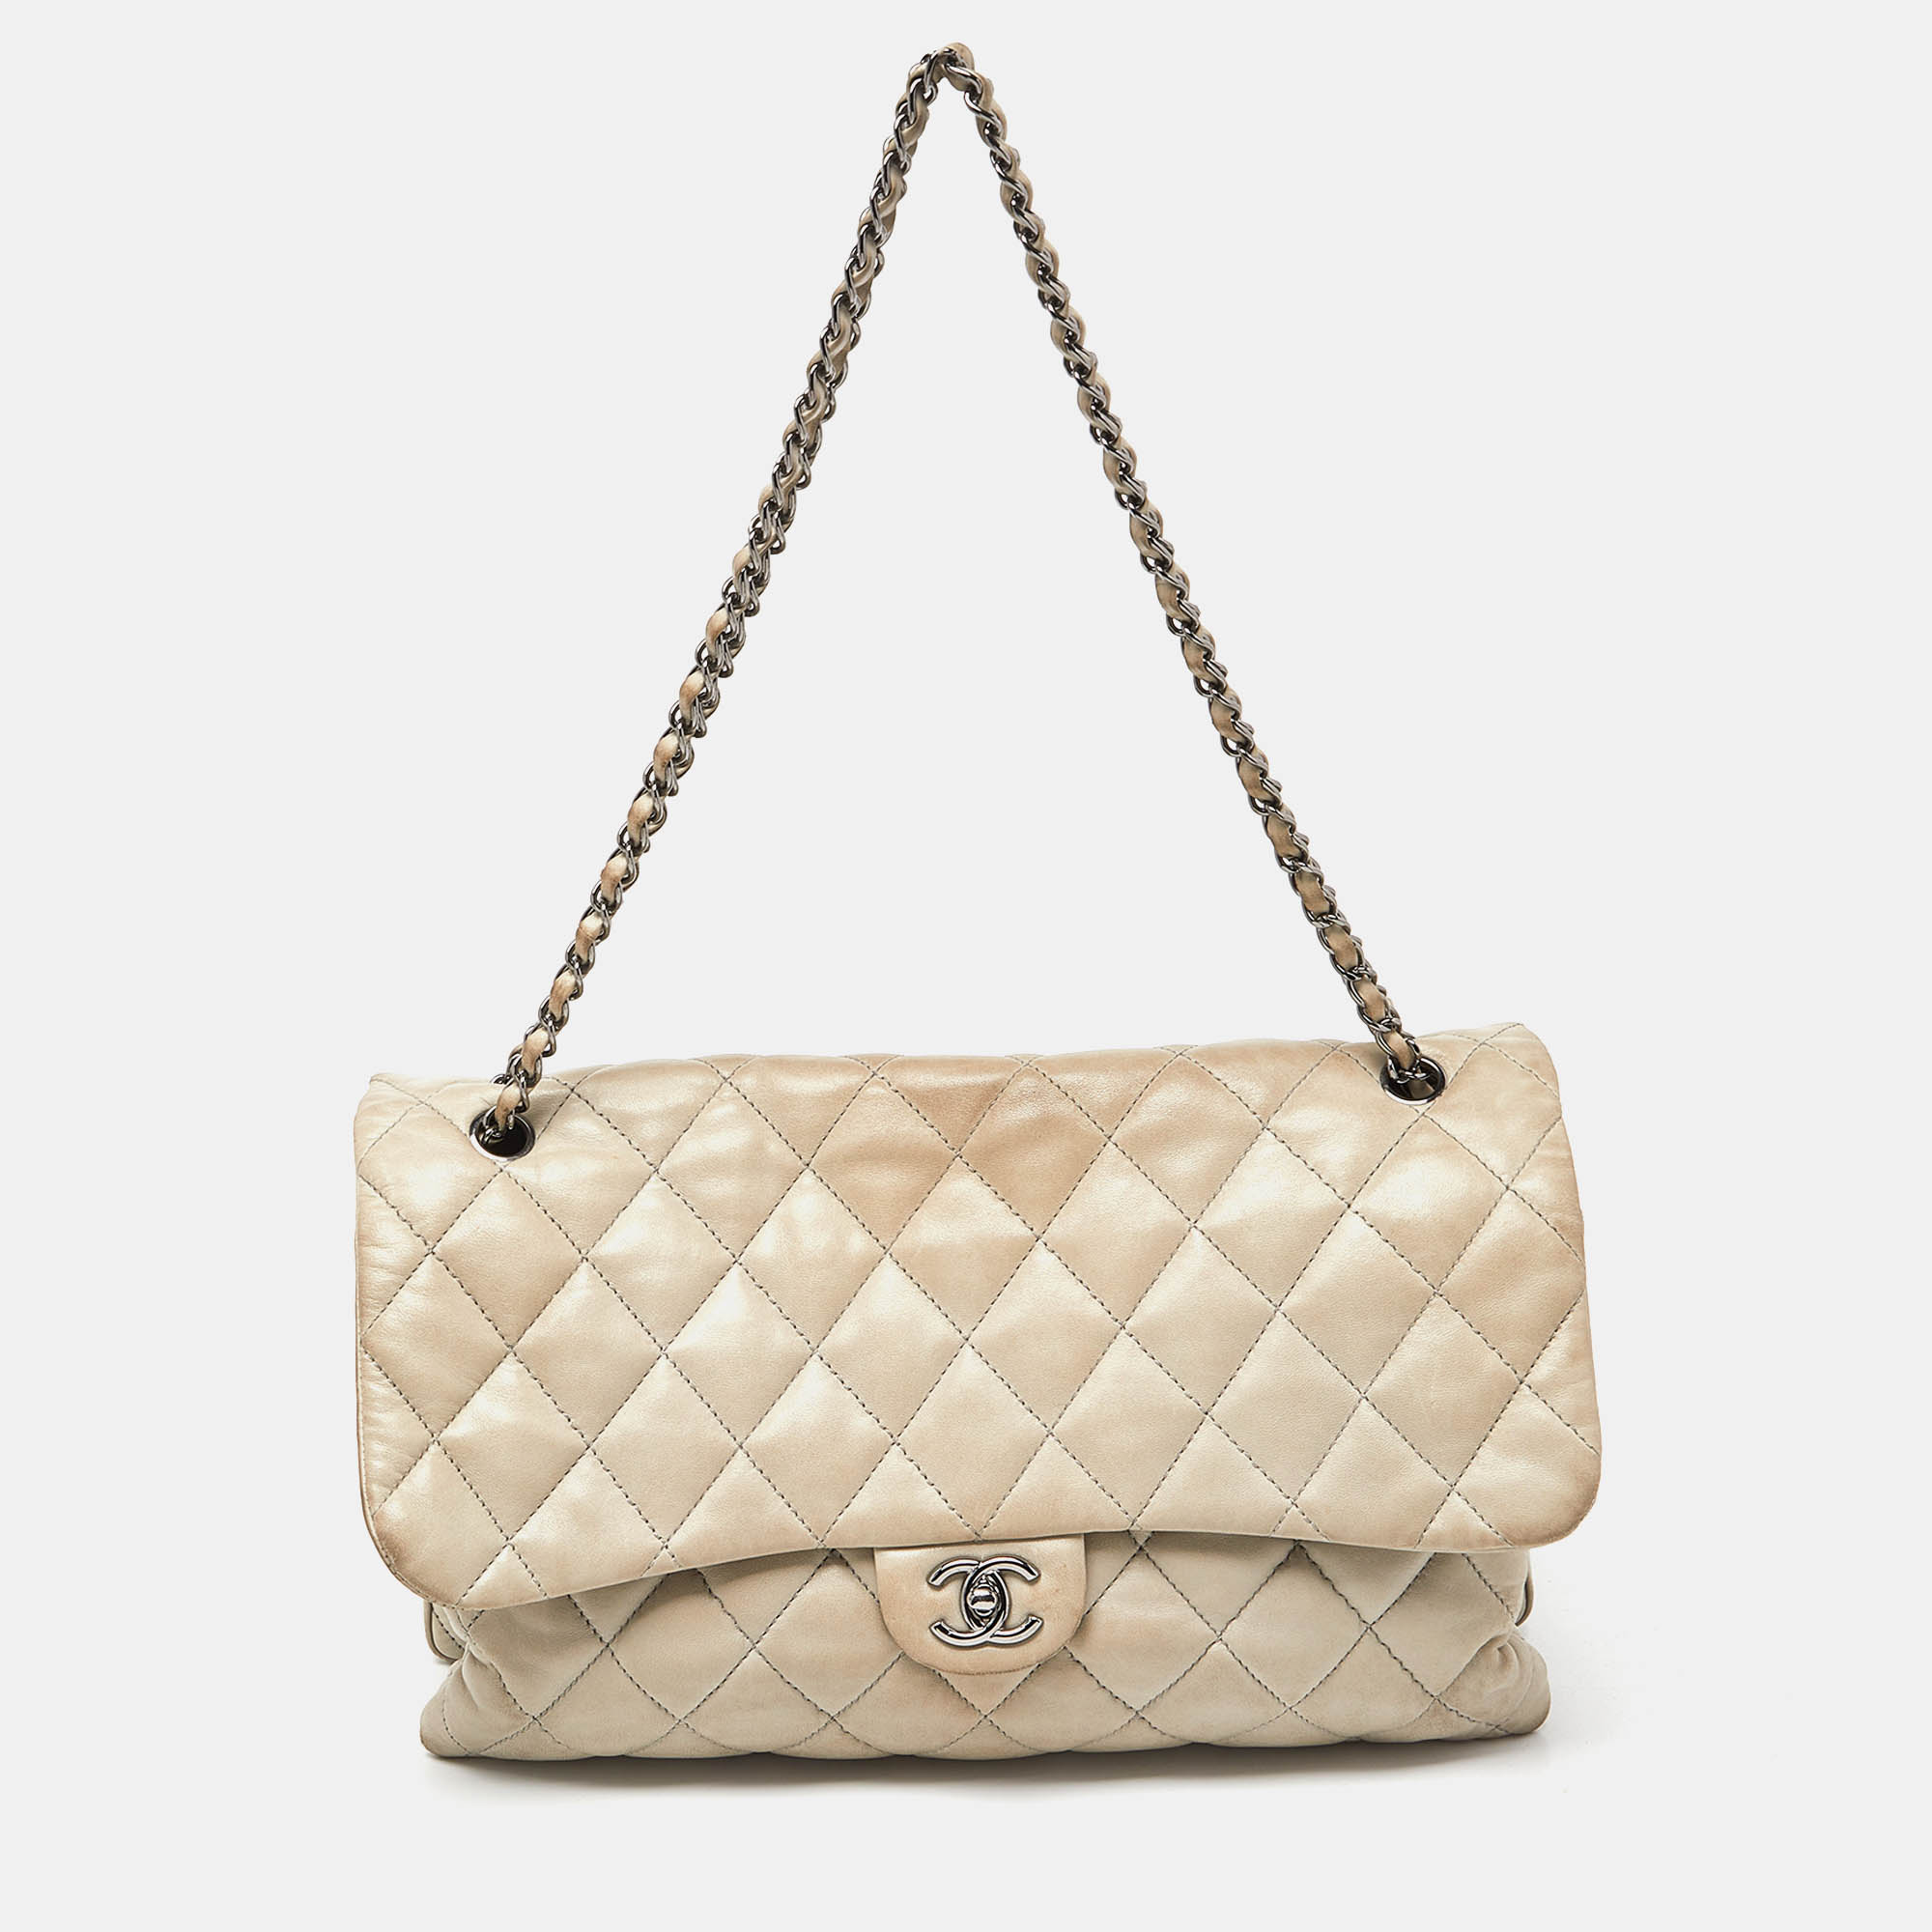 Chanel grey quilted leather maxi 3 accordion flap bag